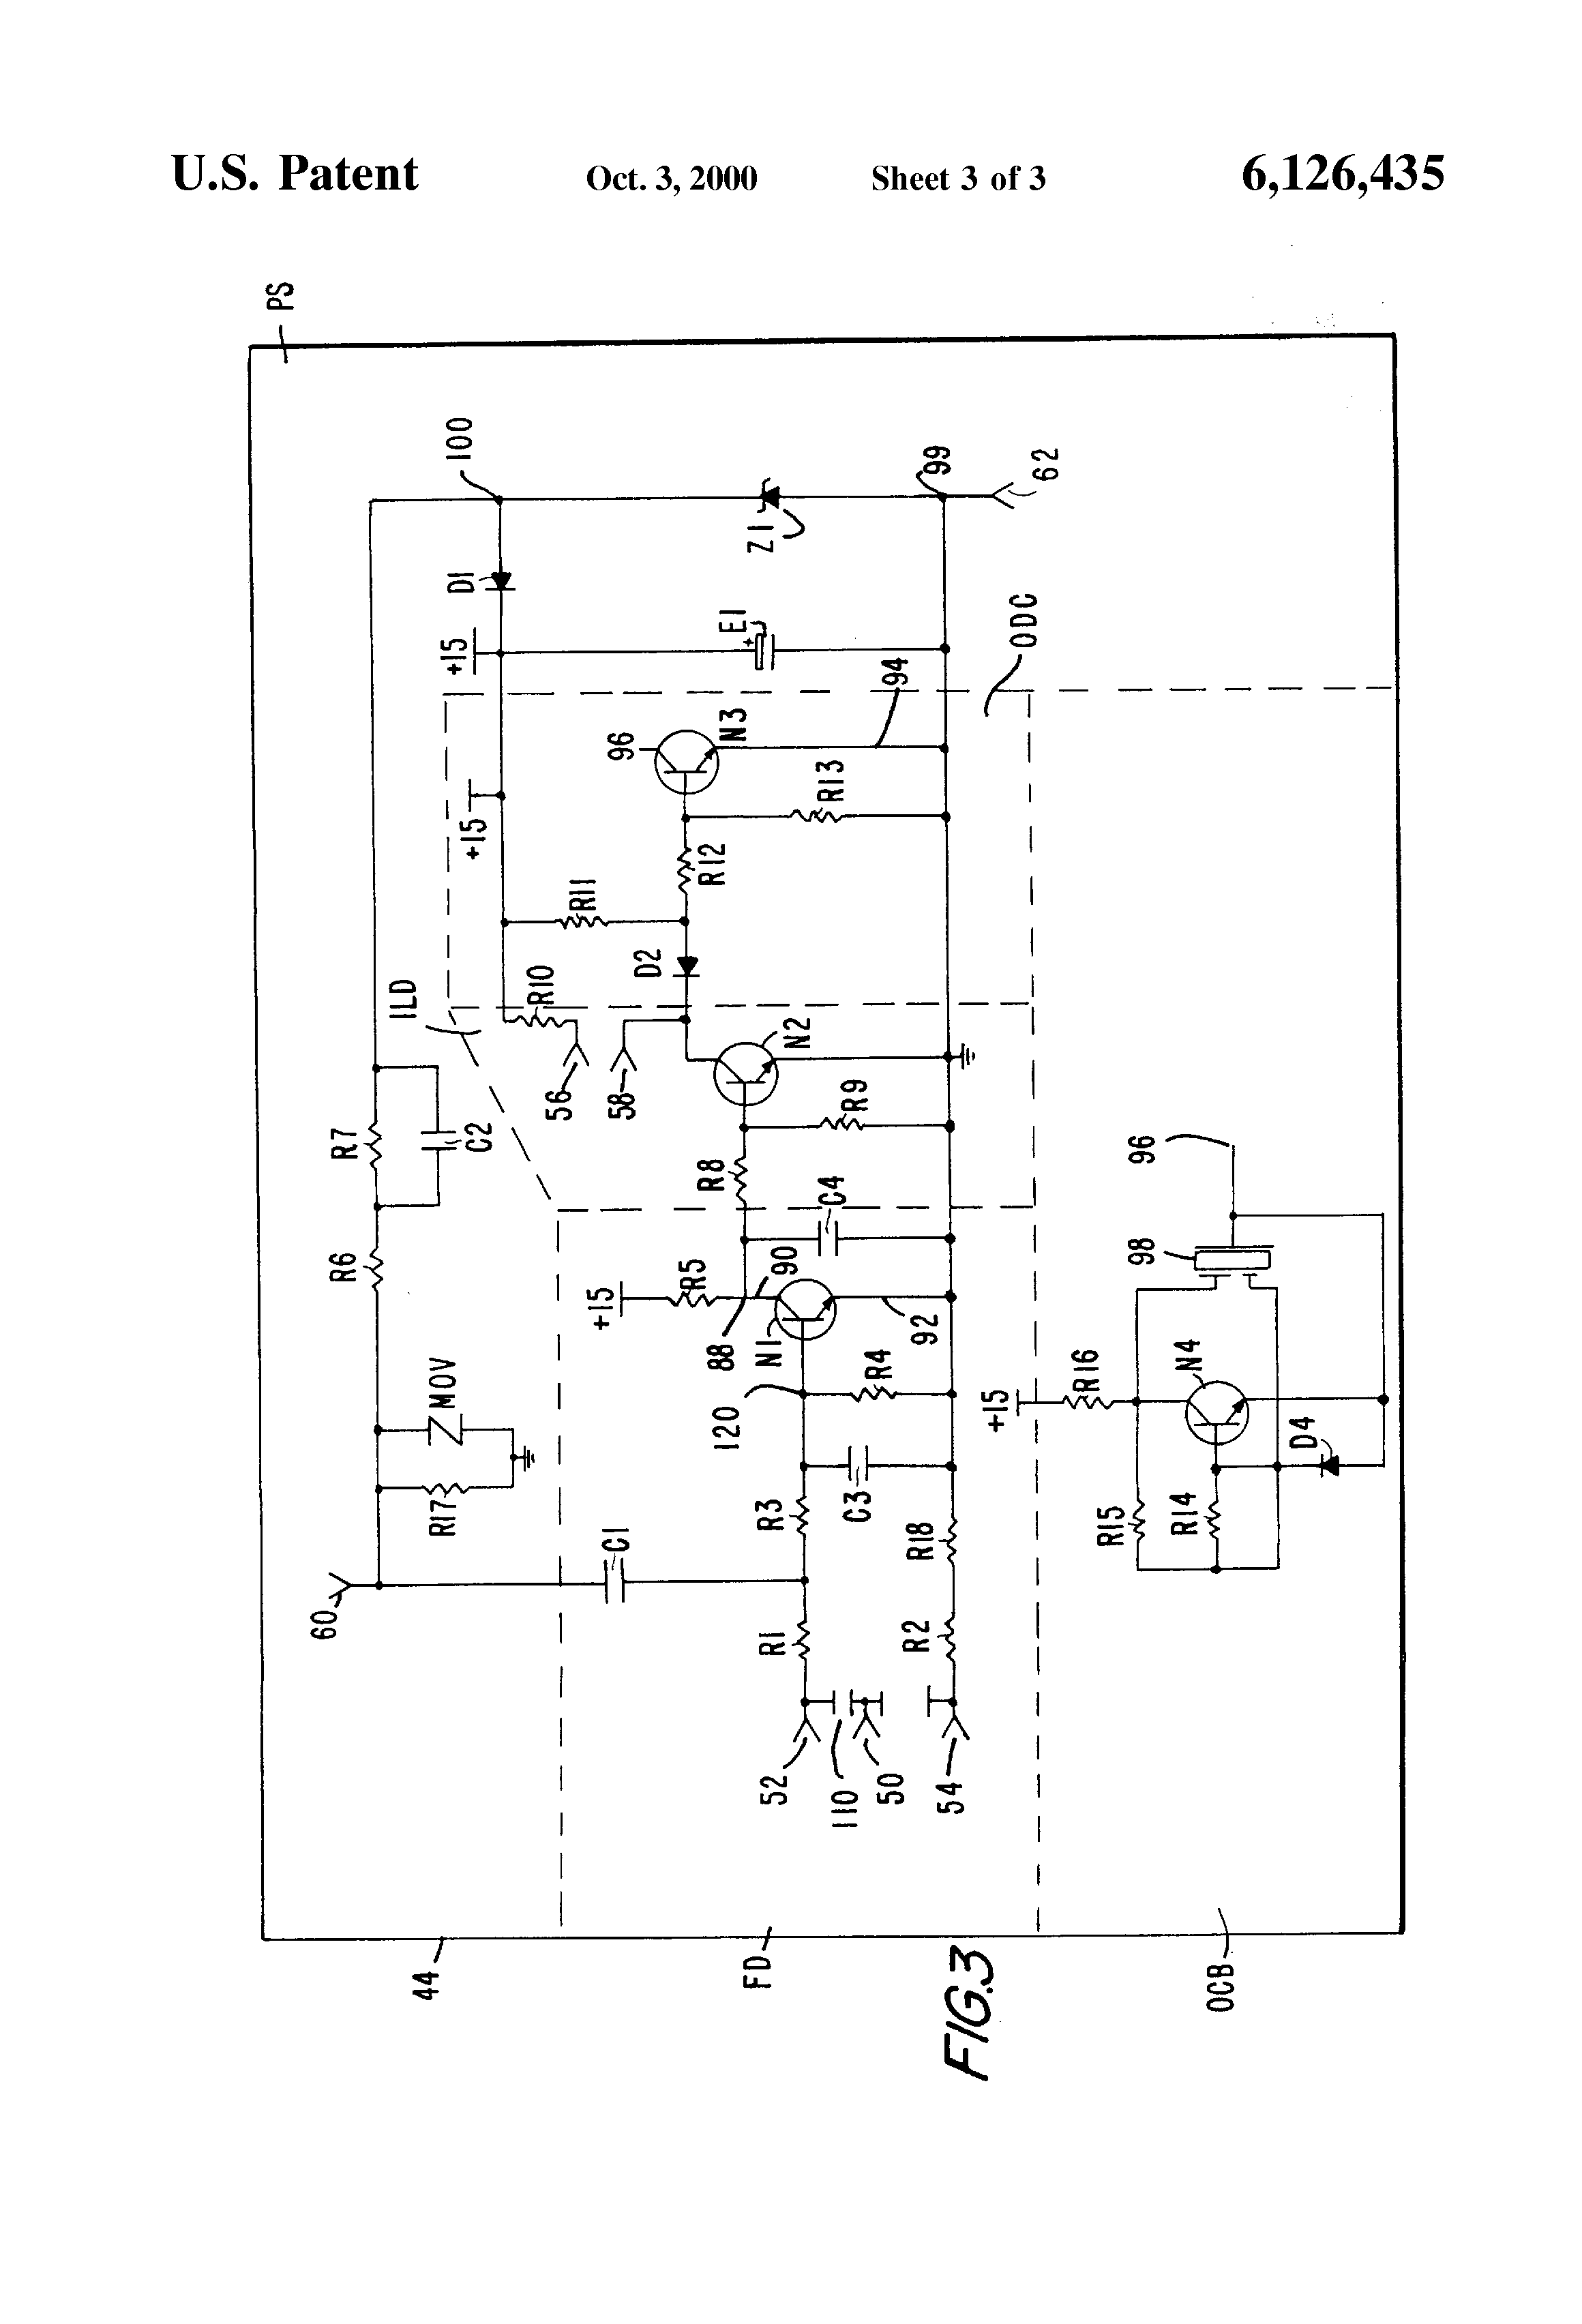 wiring diagram for a tappan gas stove igniter